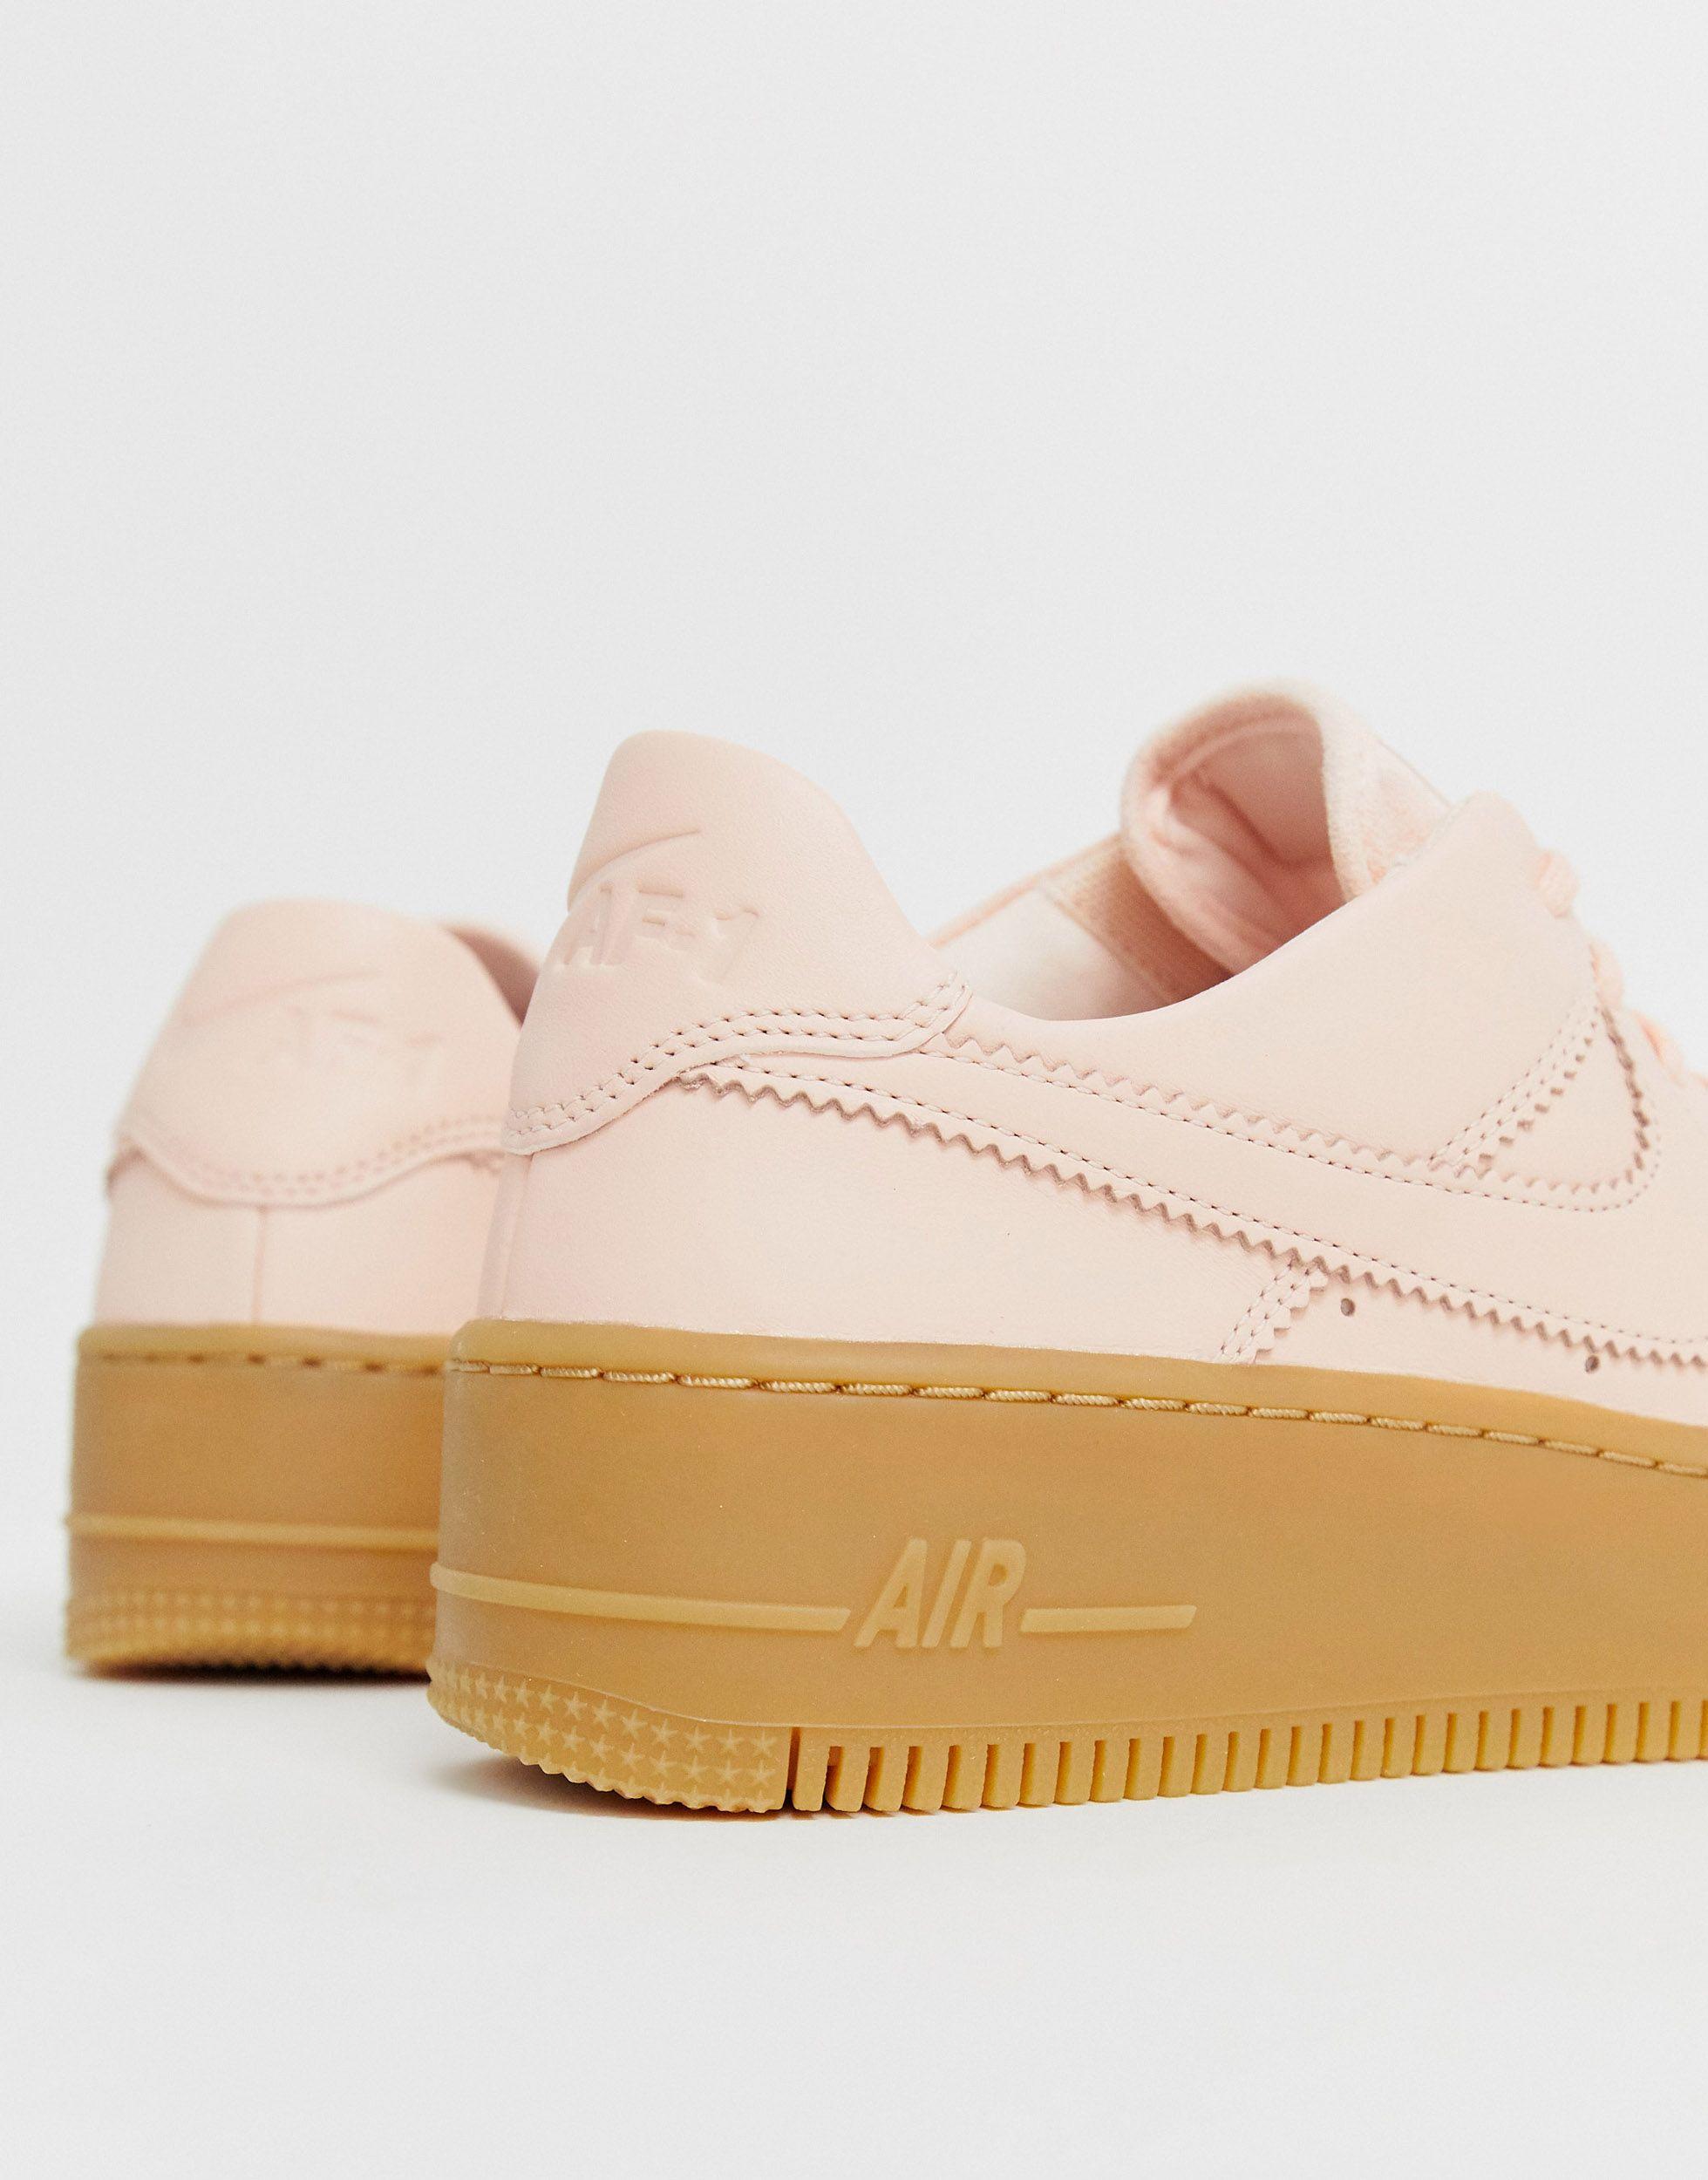 Nike Rubber Pale Gum Sole Air Force 1 Sage Low Trainers in Pink - Lyst